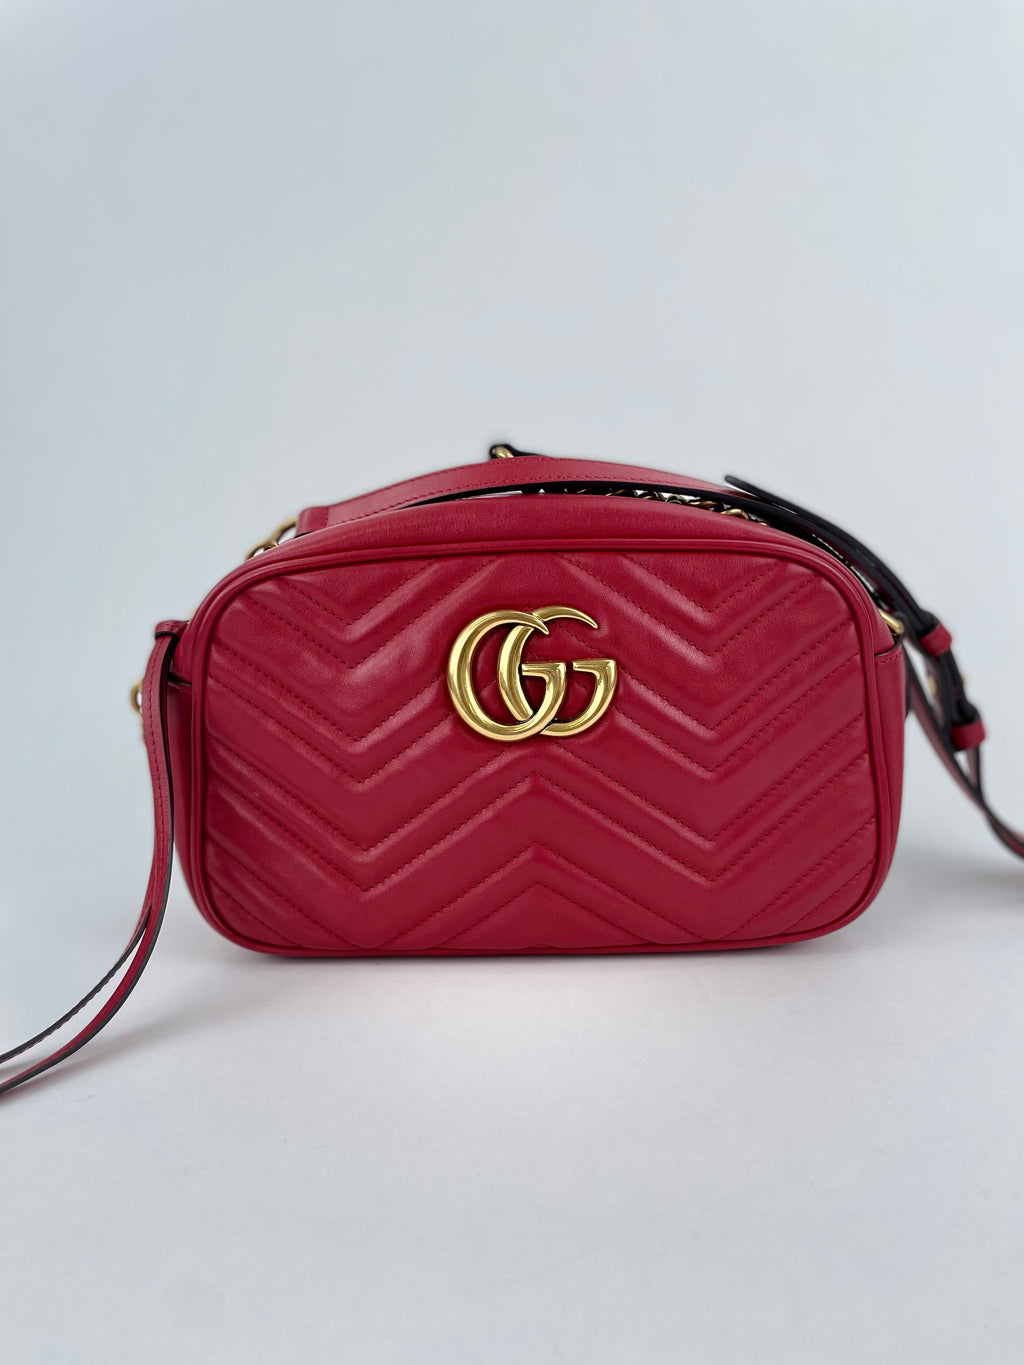 PRELOVED Gucci GG Marmont Matelasse Small Leather Shoulder Bag 74XK7QJ 080223 $200 OFF